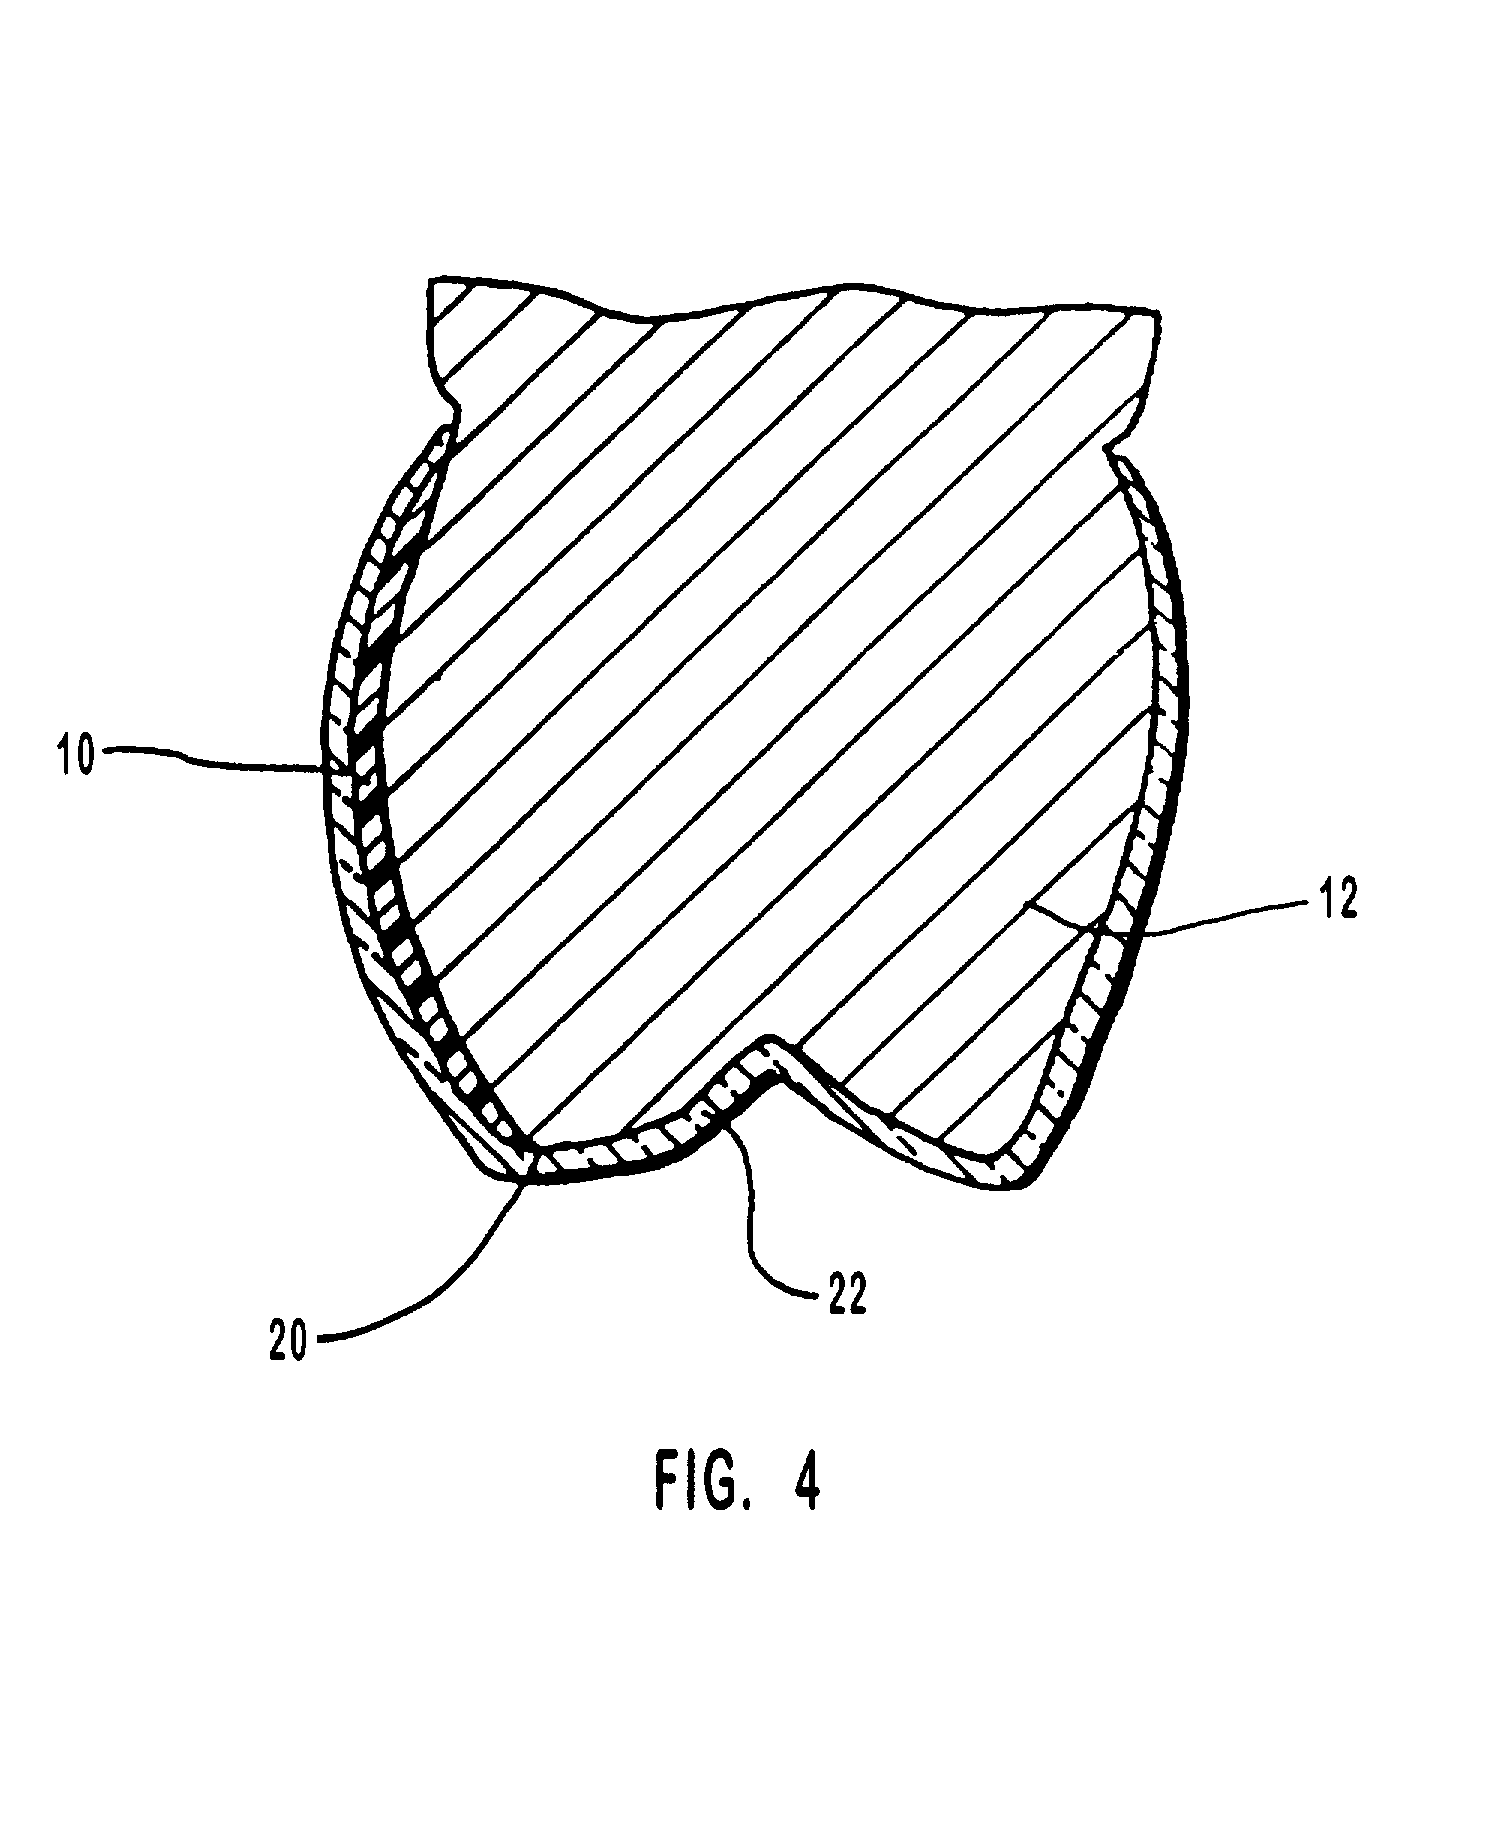 One-part dental compositions and methods for bleaching and desensitizing teeth